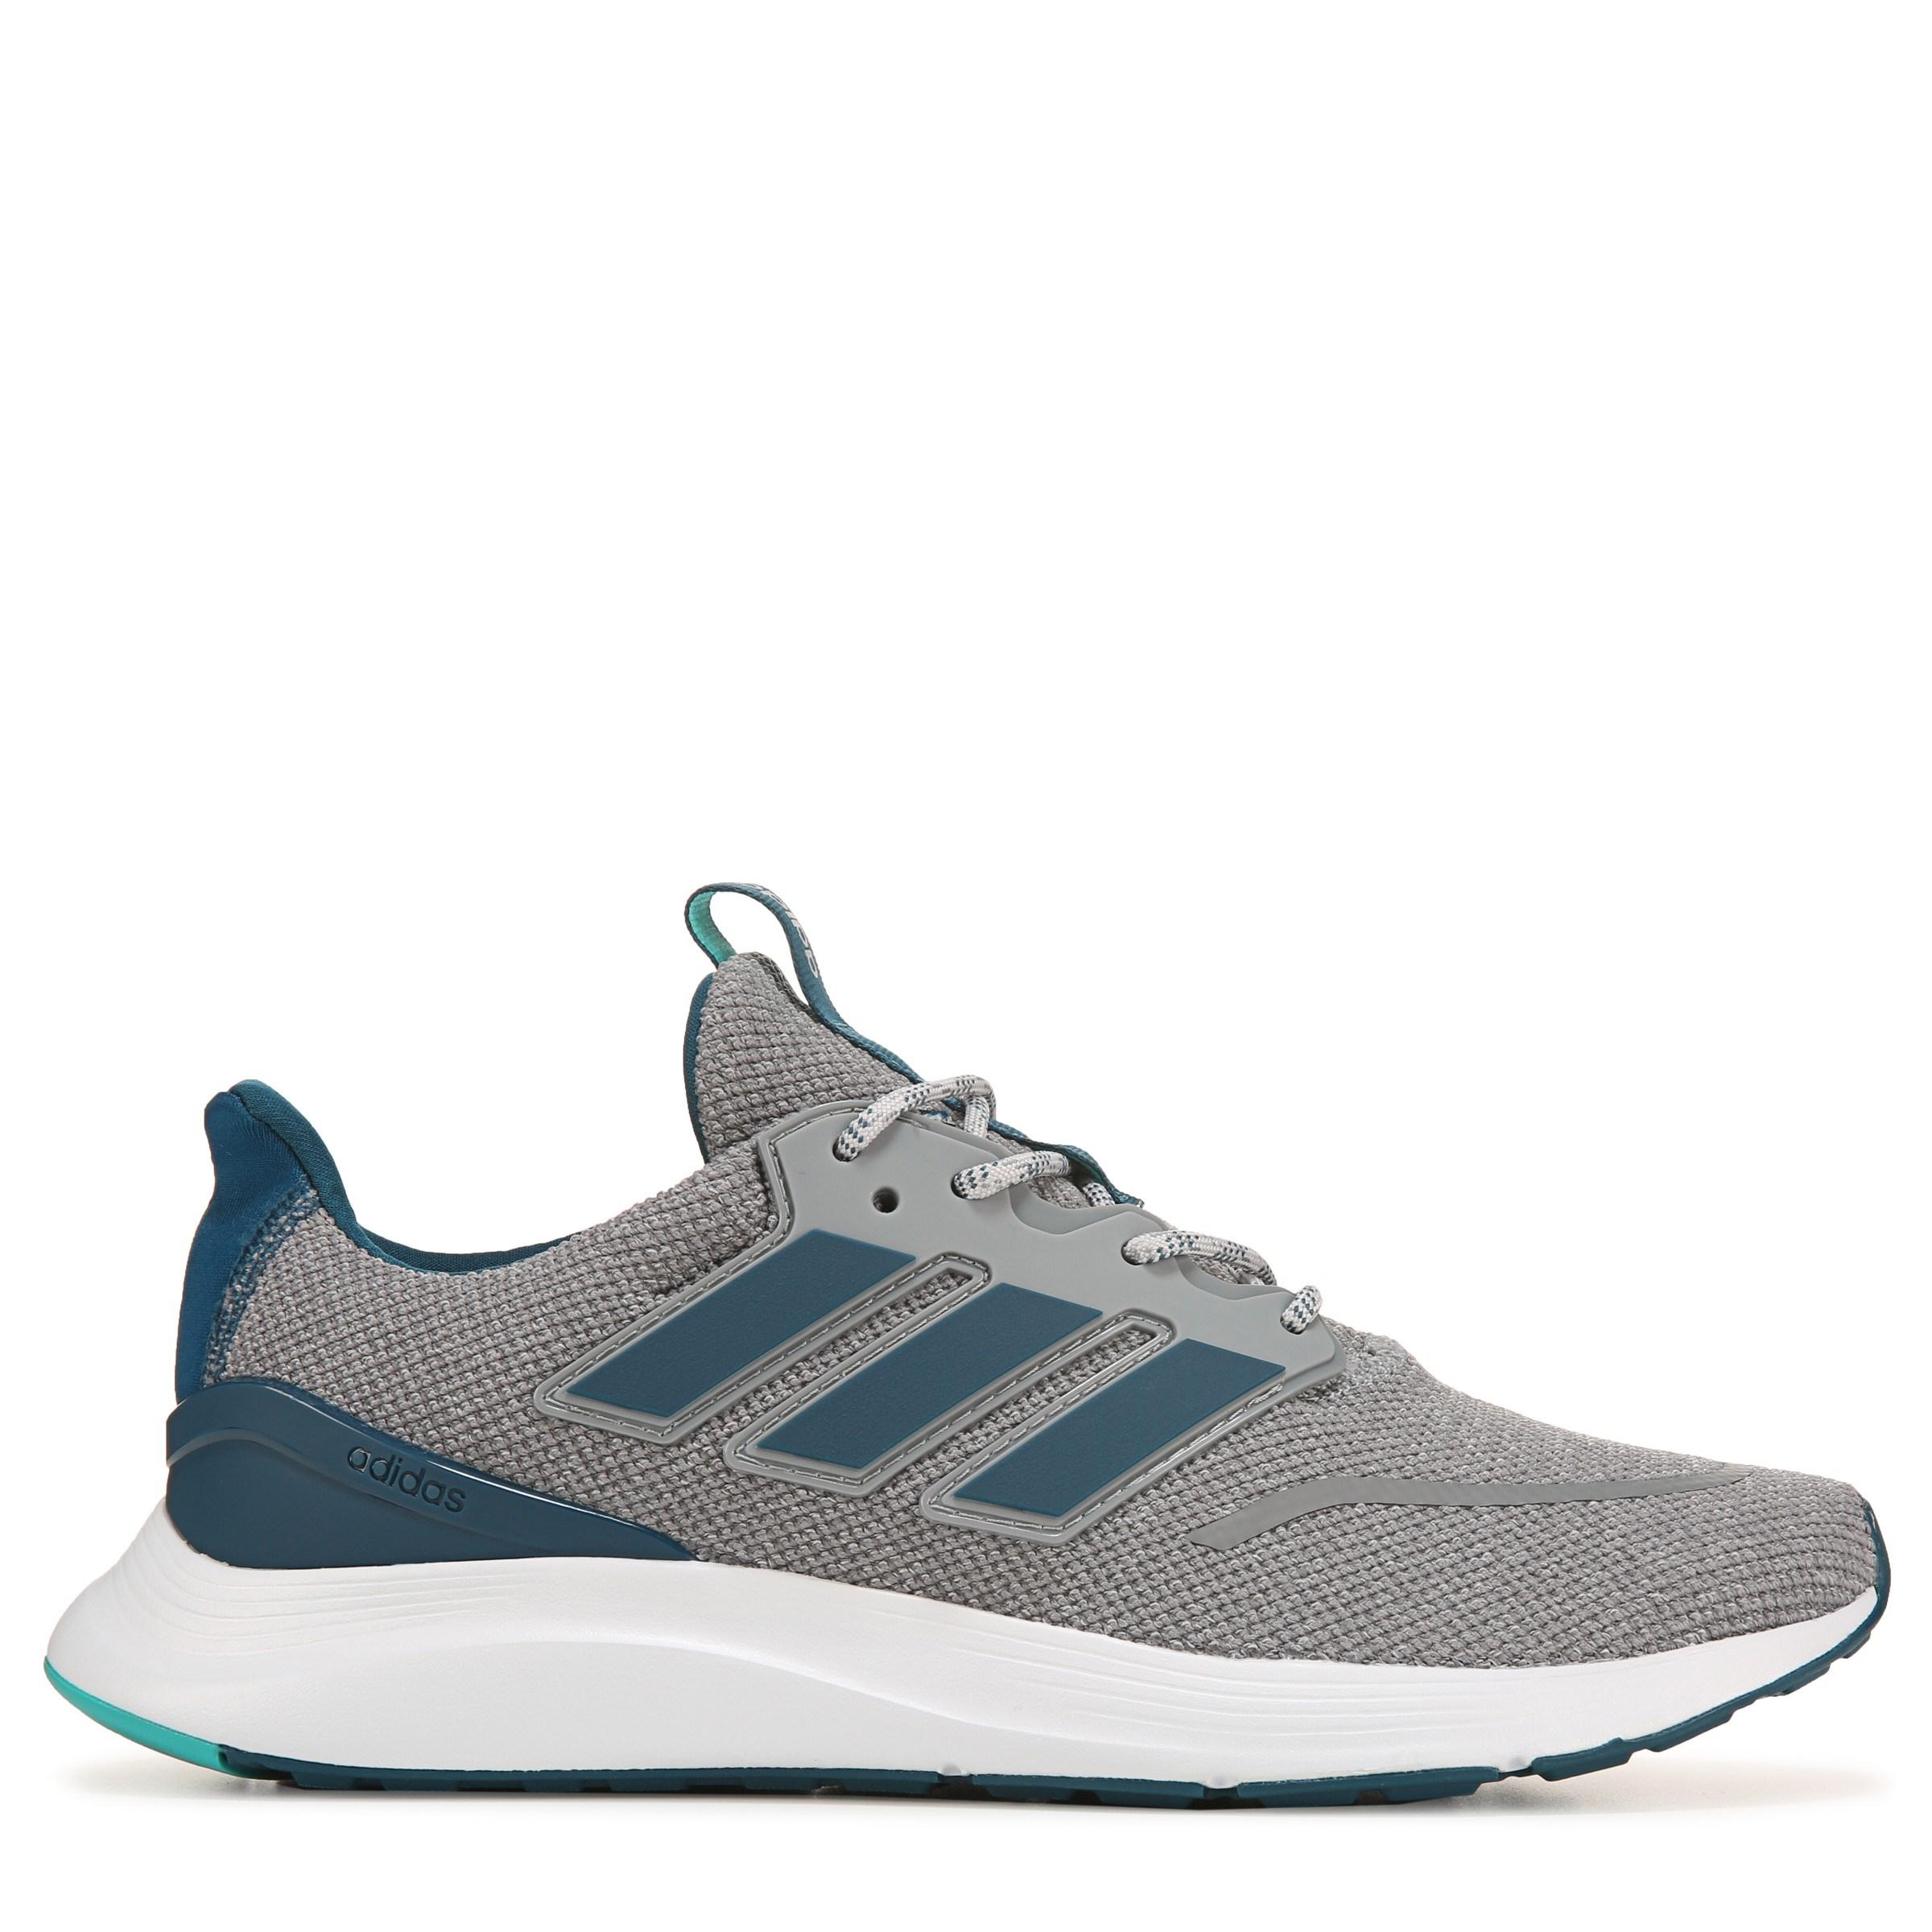 adidas Energy Falcon Running Shoes in Grey/Teal (Gray) for Men - Lyst